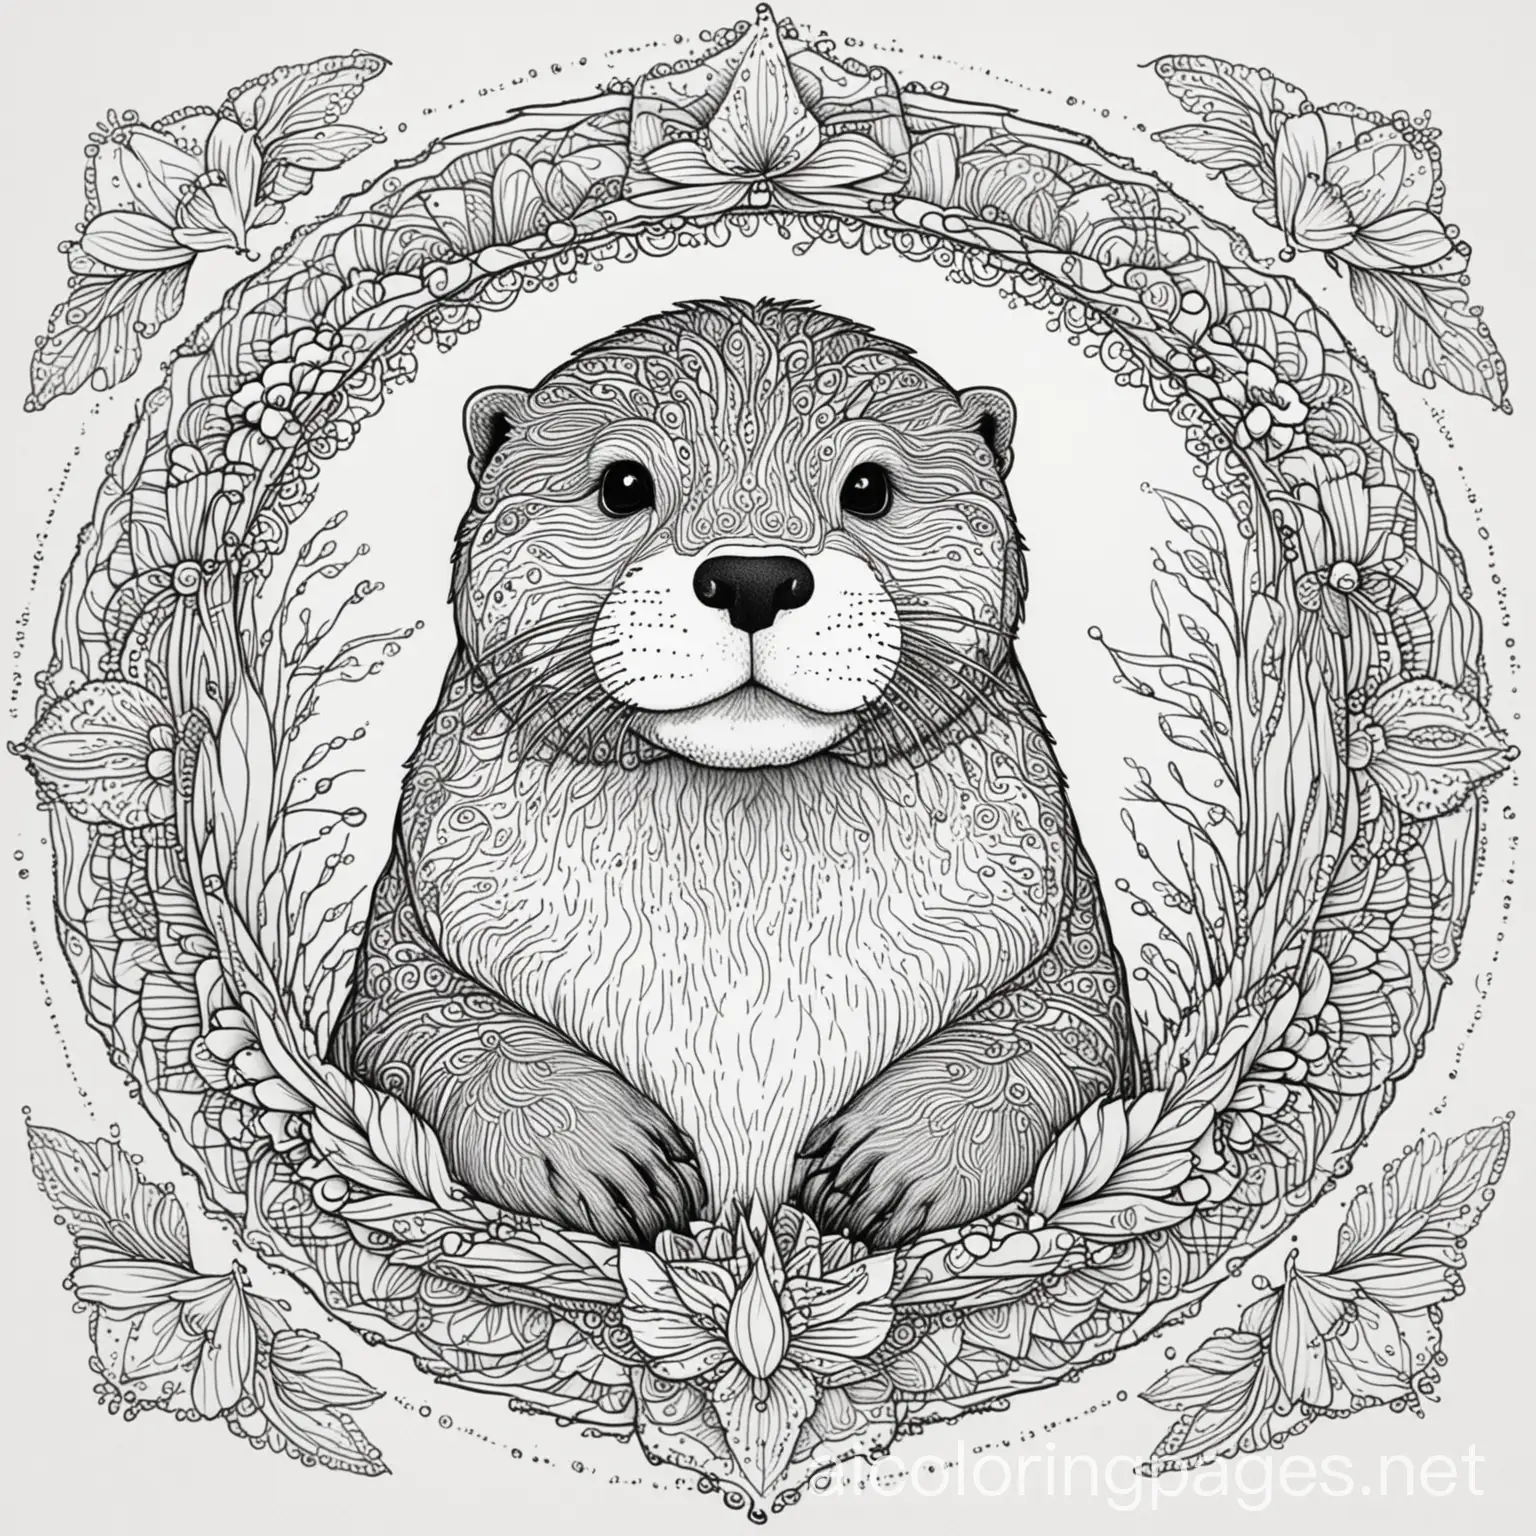 A Otter with vivid pattern inside of it, mandala design, coloring book photo, thick lines, no dots, just outline, Coloring Page, black and white, line art, white background, Simplicity, Ample White Space. The background of the coloring page is plain white to make it easy for young children to color within the lines. The outlines of all the subjects are easy to distinguish, making it simple for kids to color without too much difficulty